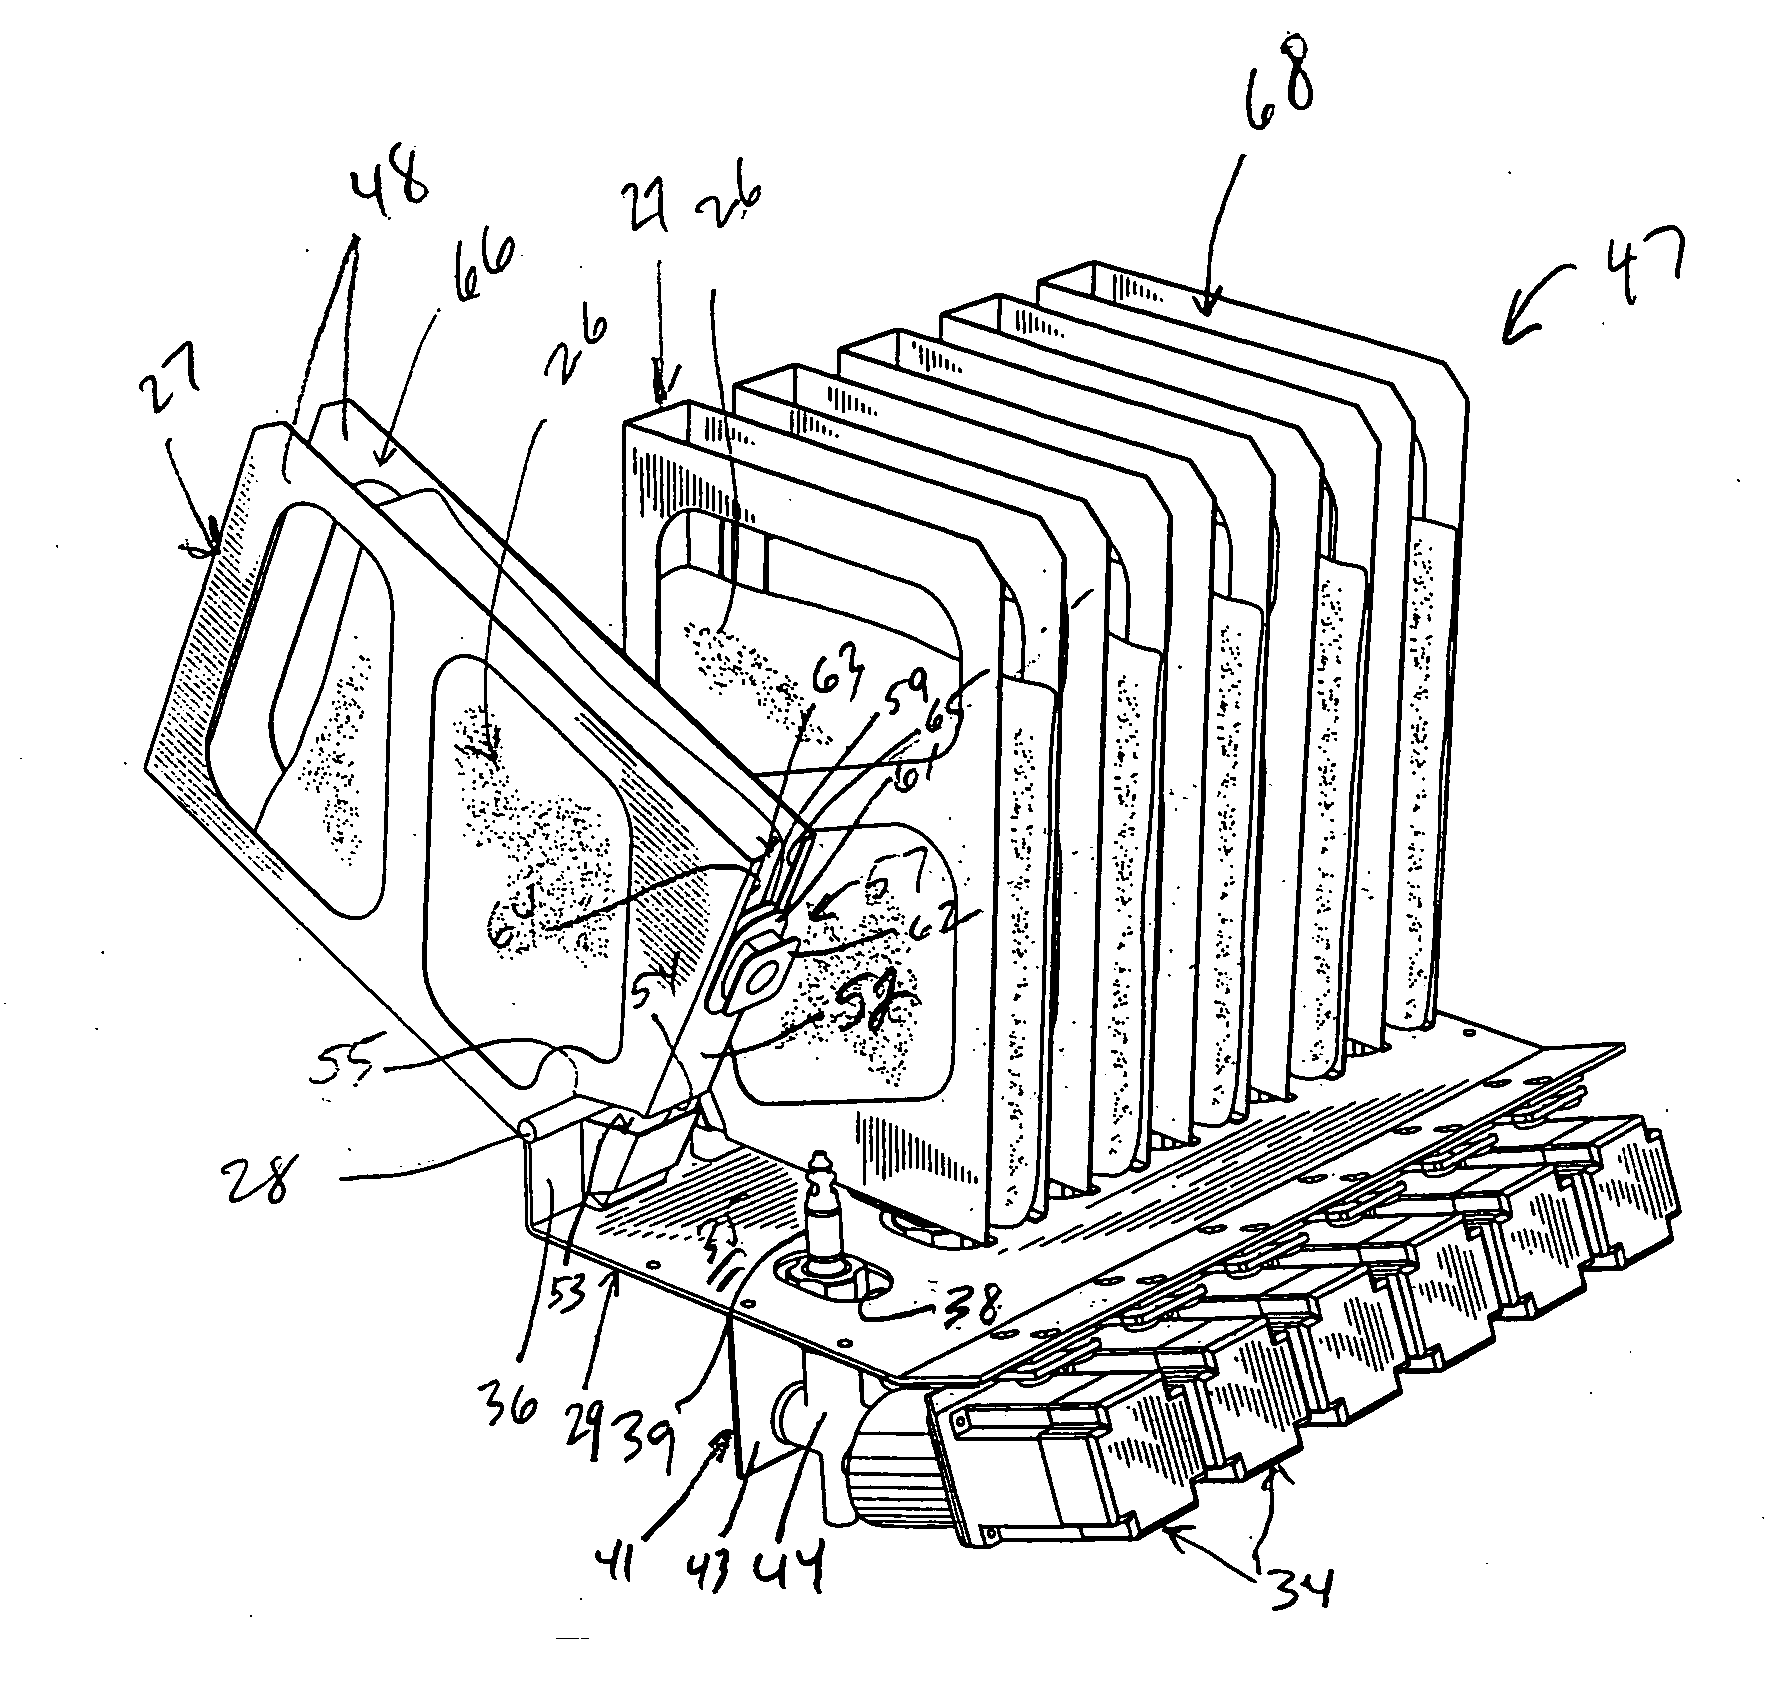 Shelving systems and holders for flexible bags for containing fluid for use in fluid dispensing systems